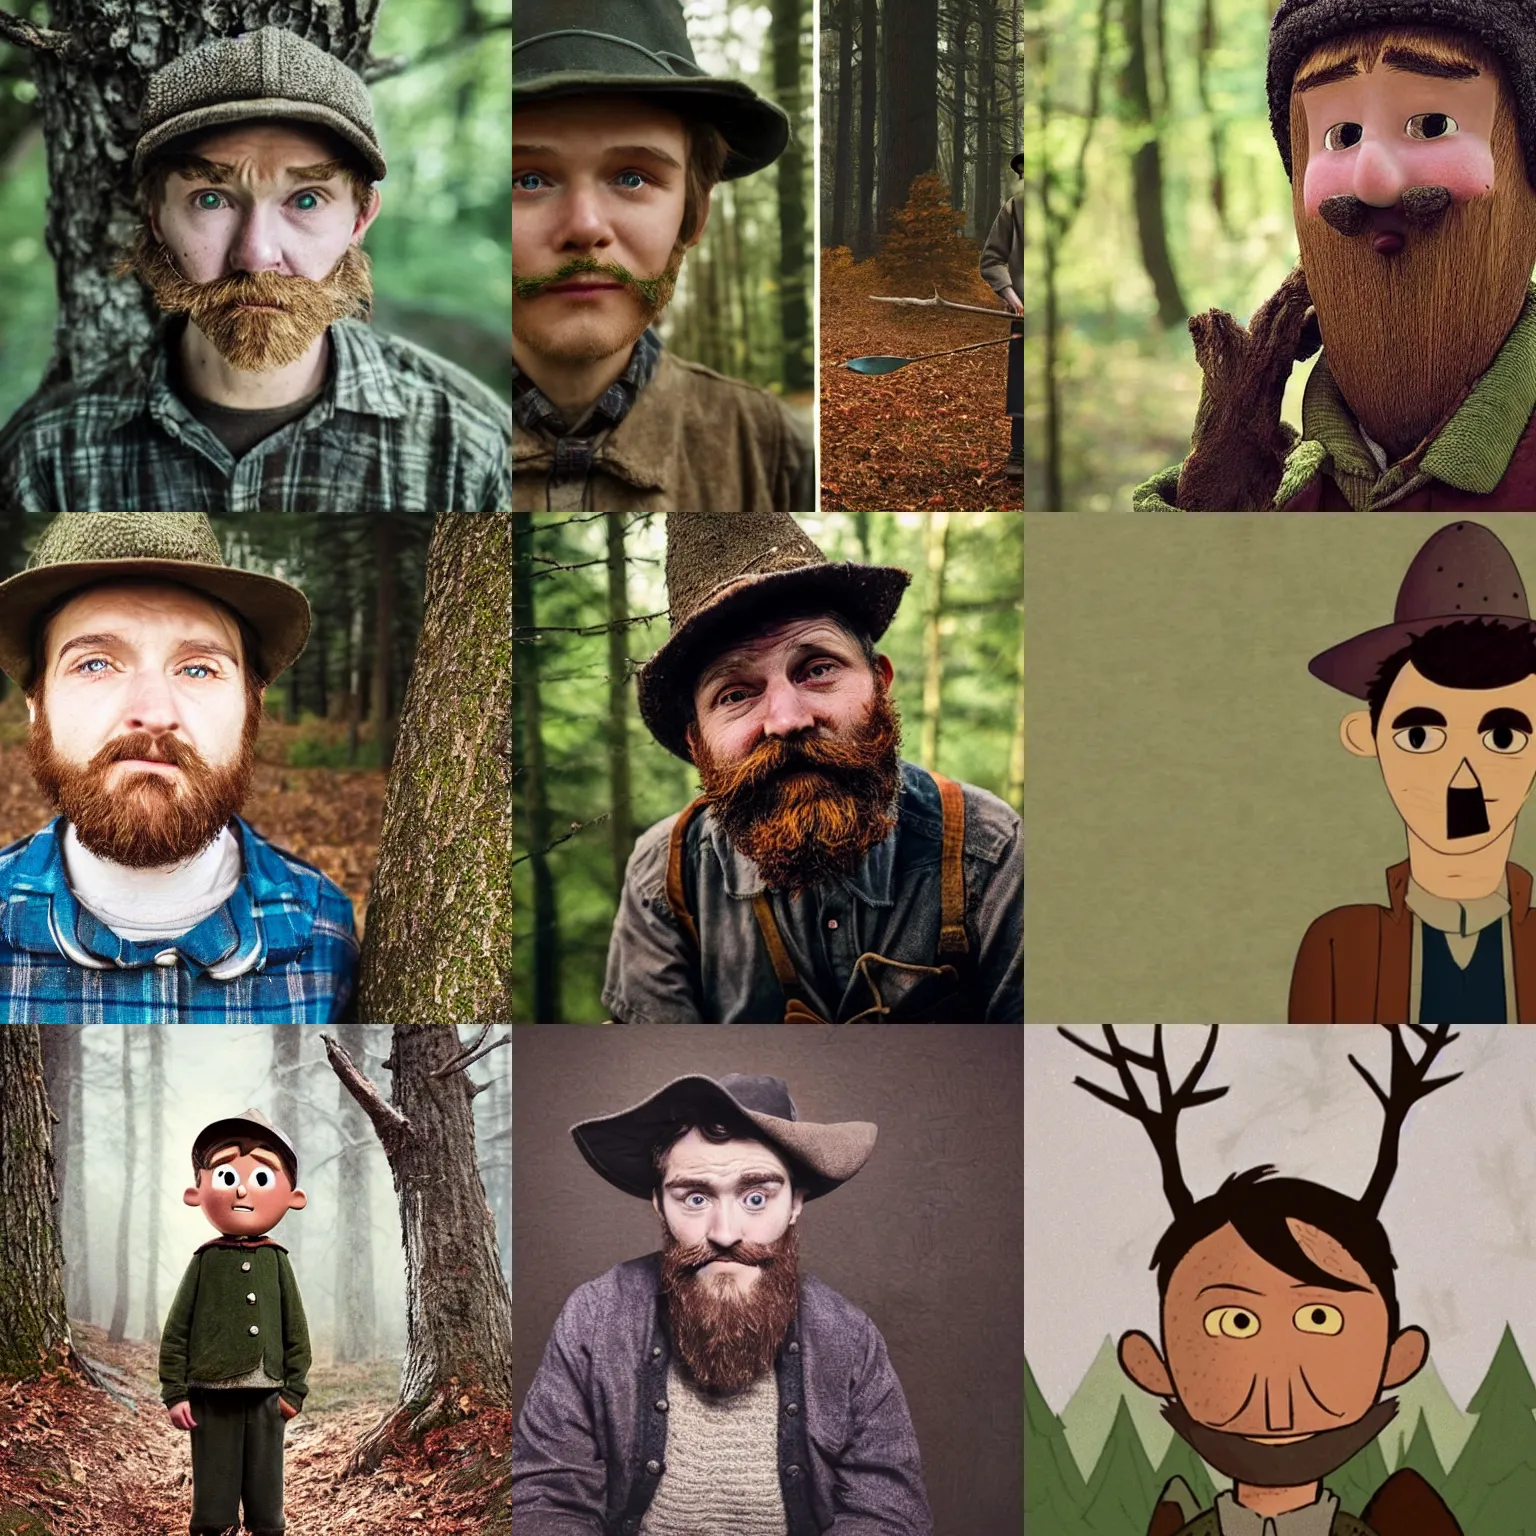 Prompt: portrait photo still of real life woodsman from over the garden wall, played by a human actor in the new, live drama series